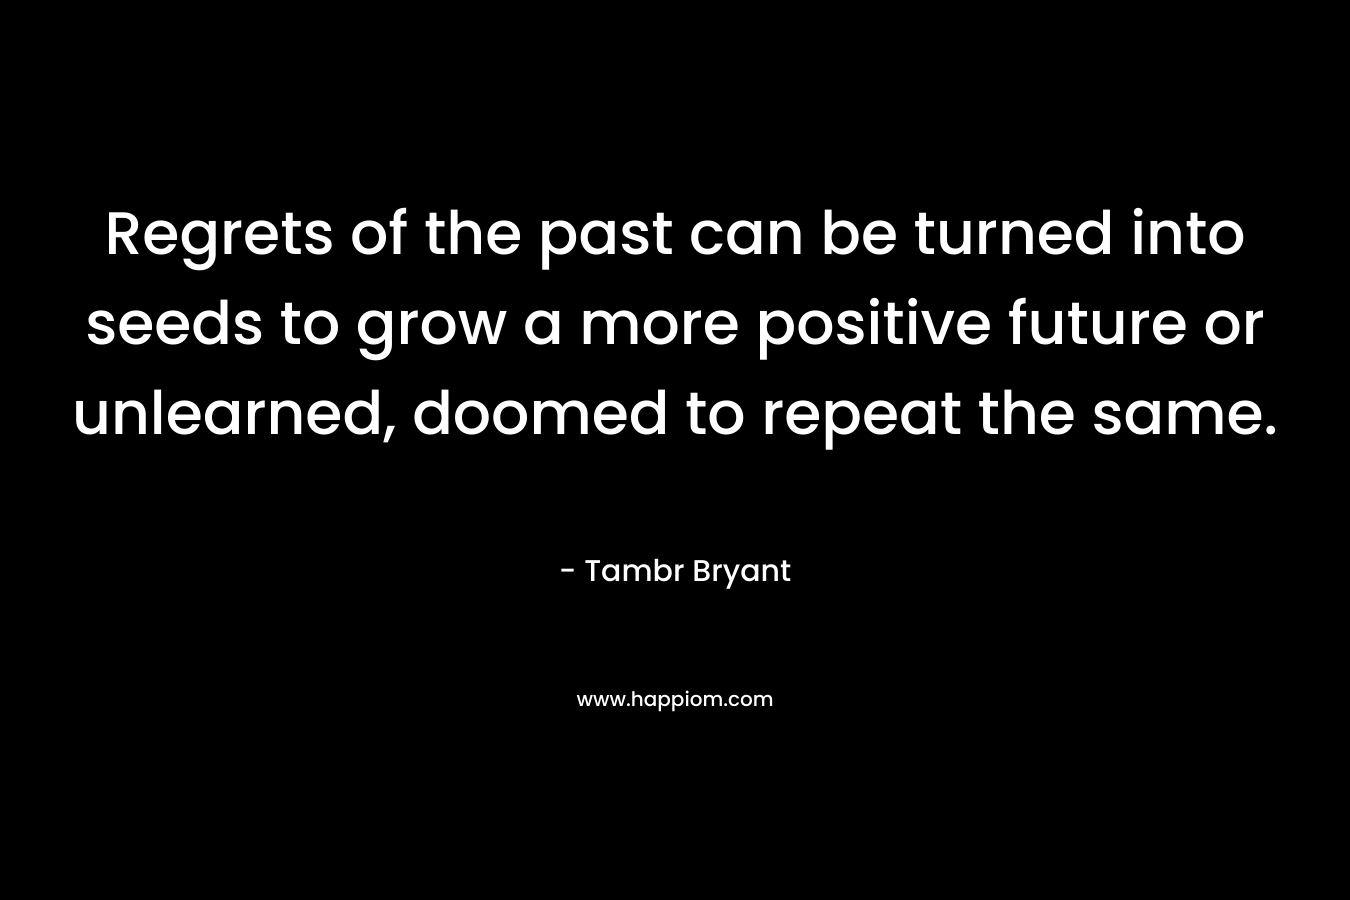 Regrets of the past can be turned into seeds to grow a more positive future or unlearned, doomed to repeat the same. – Tambr Bryant